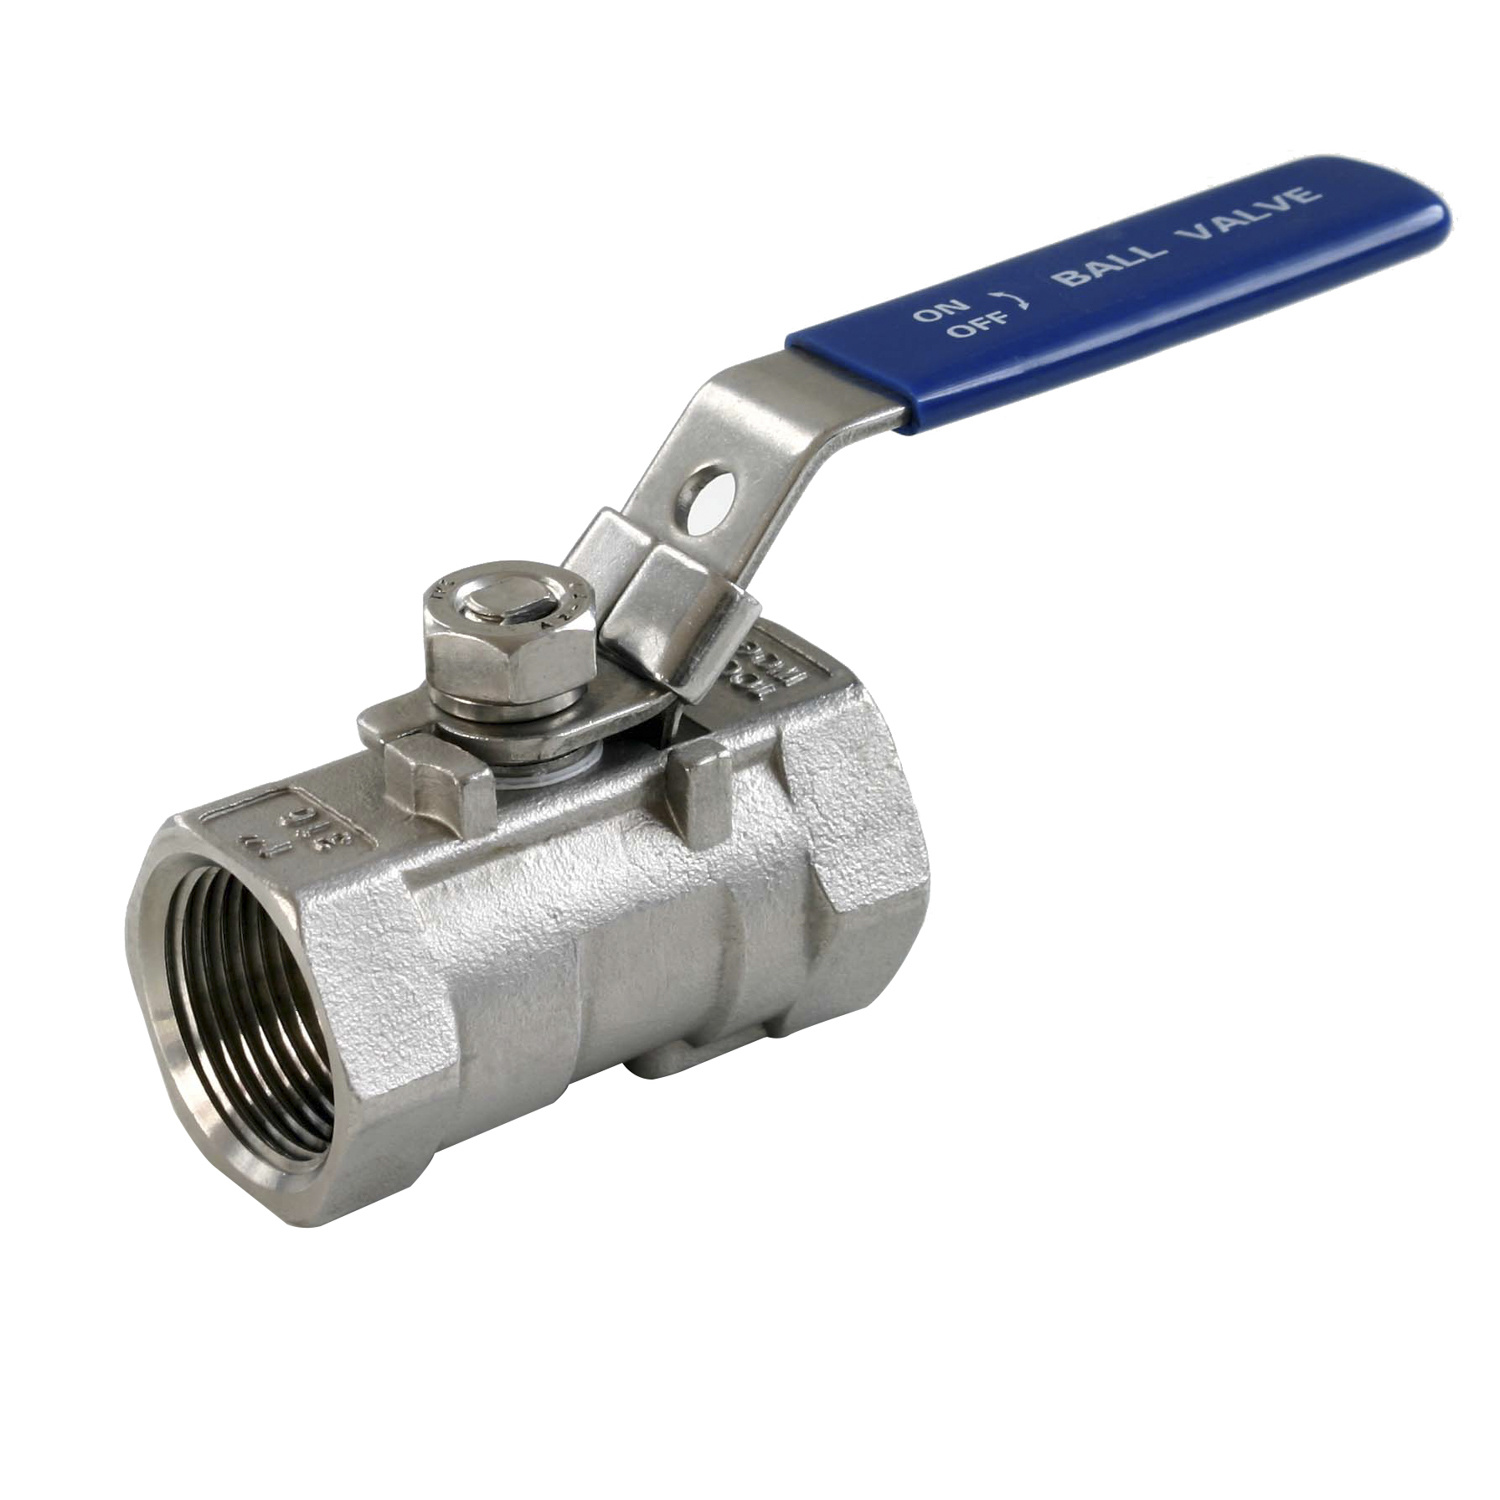 2PC Ball Valve With mounting pad